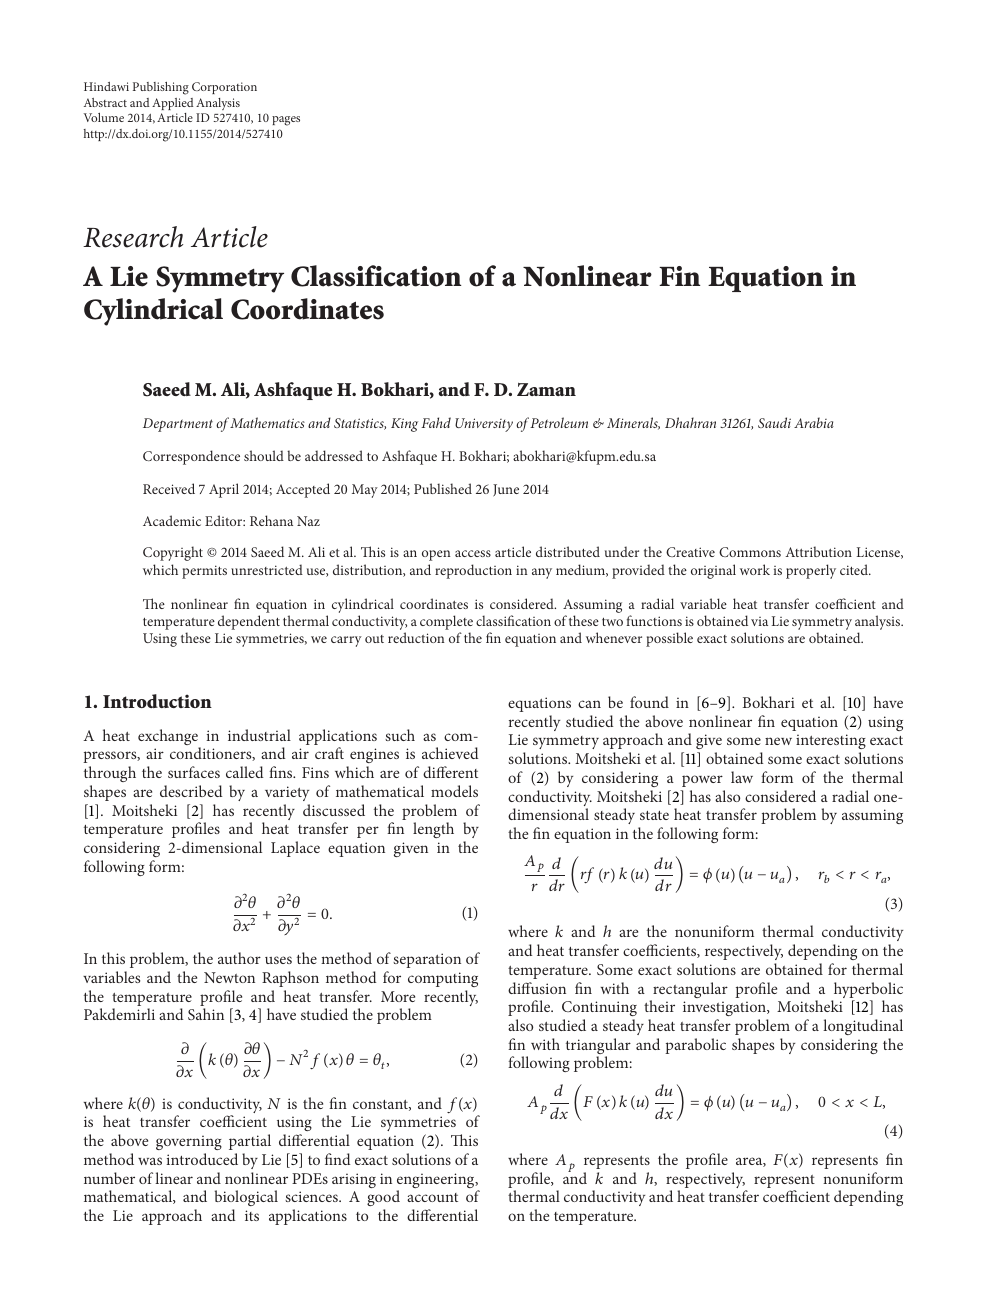 A Lie Symmetry Classification Of A Nonlinear Fin Equation In Cylindrical Coordinates Topic Of Research Paper In Mathematics Download Scholarly Article Pdf And Read For Free On Cyberleninka Open Science Hub